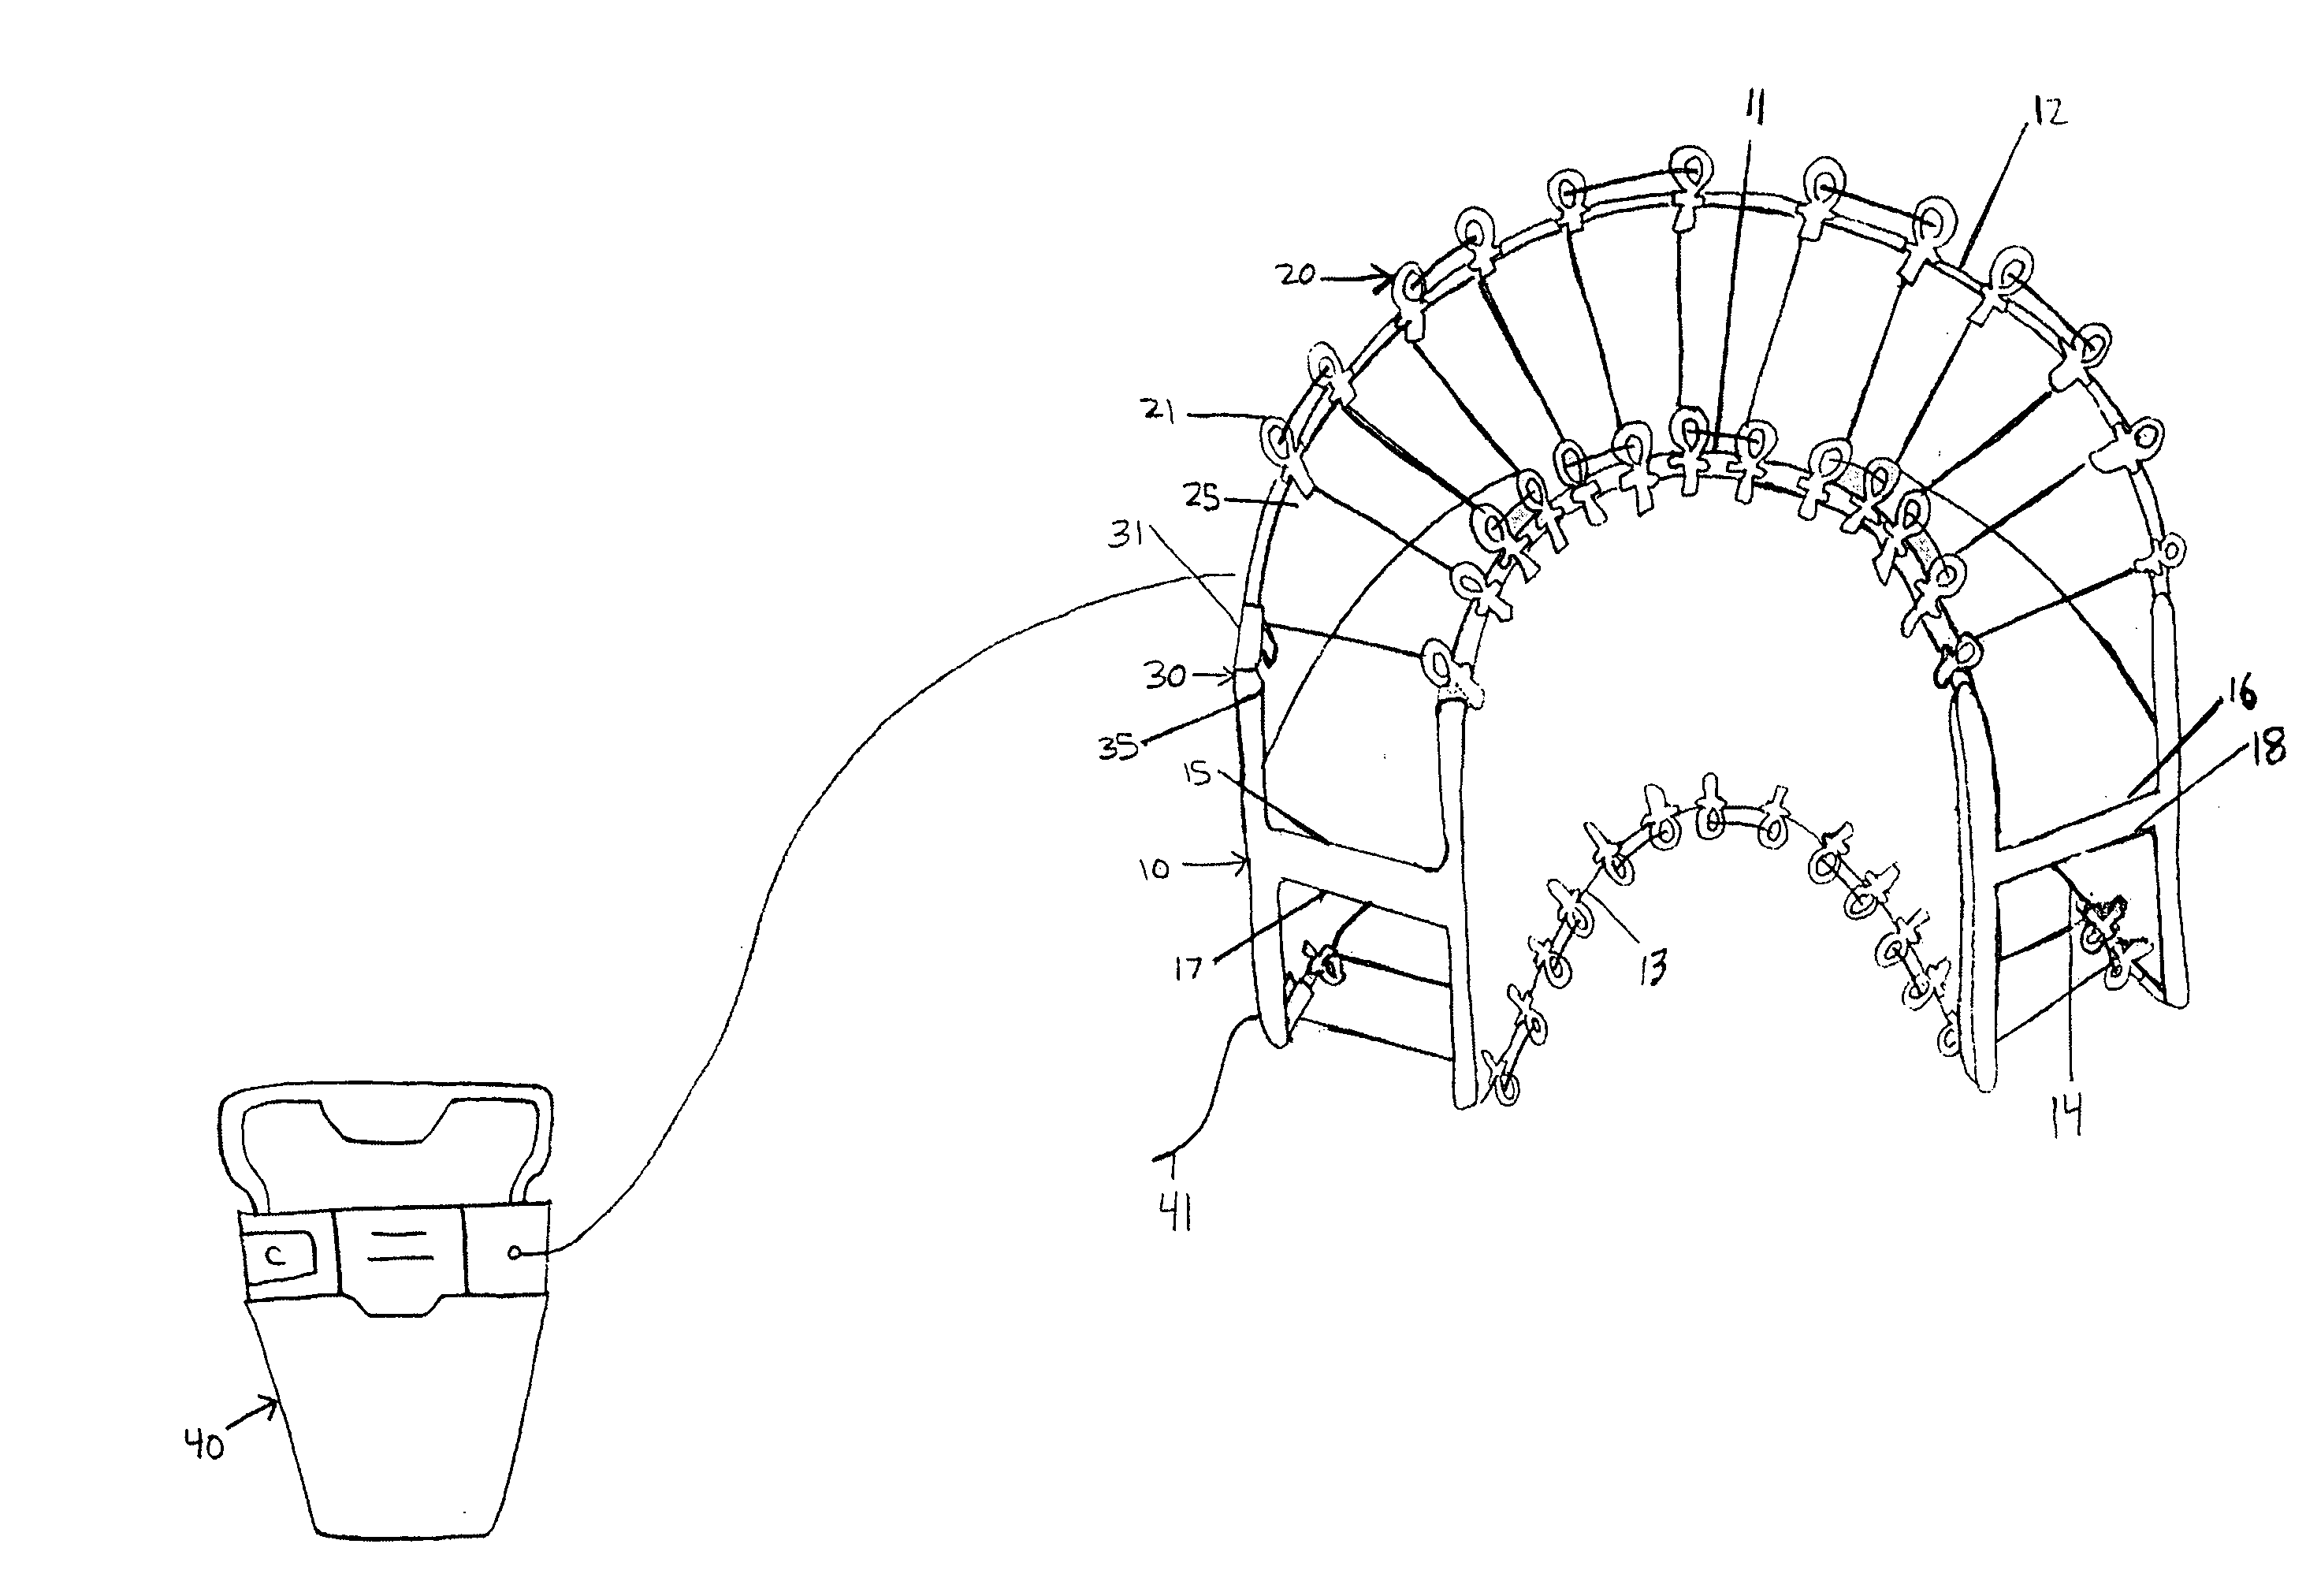 Multi-sulcus flossing device